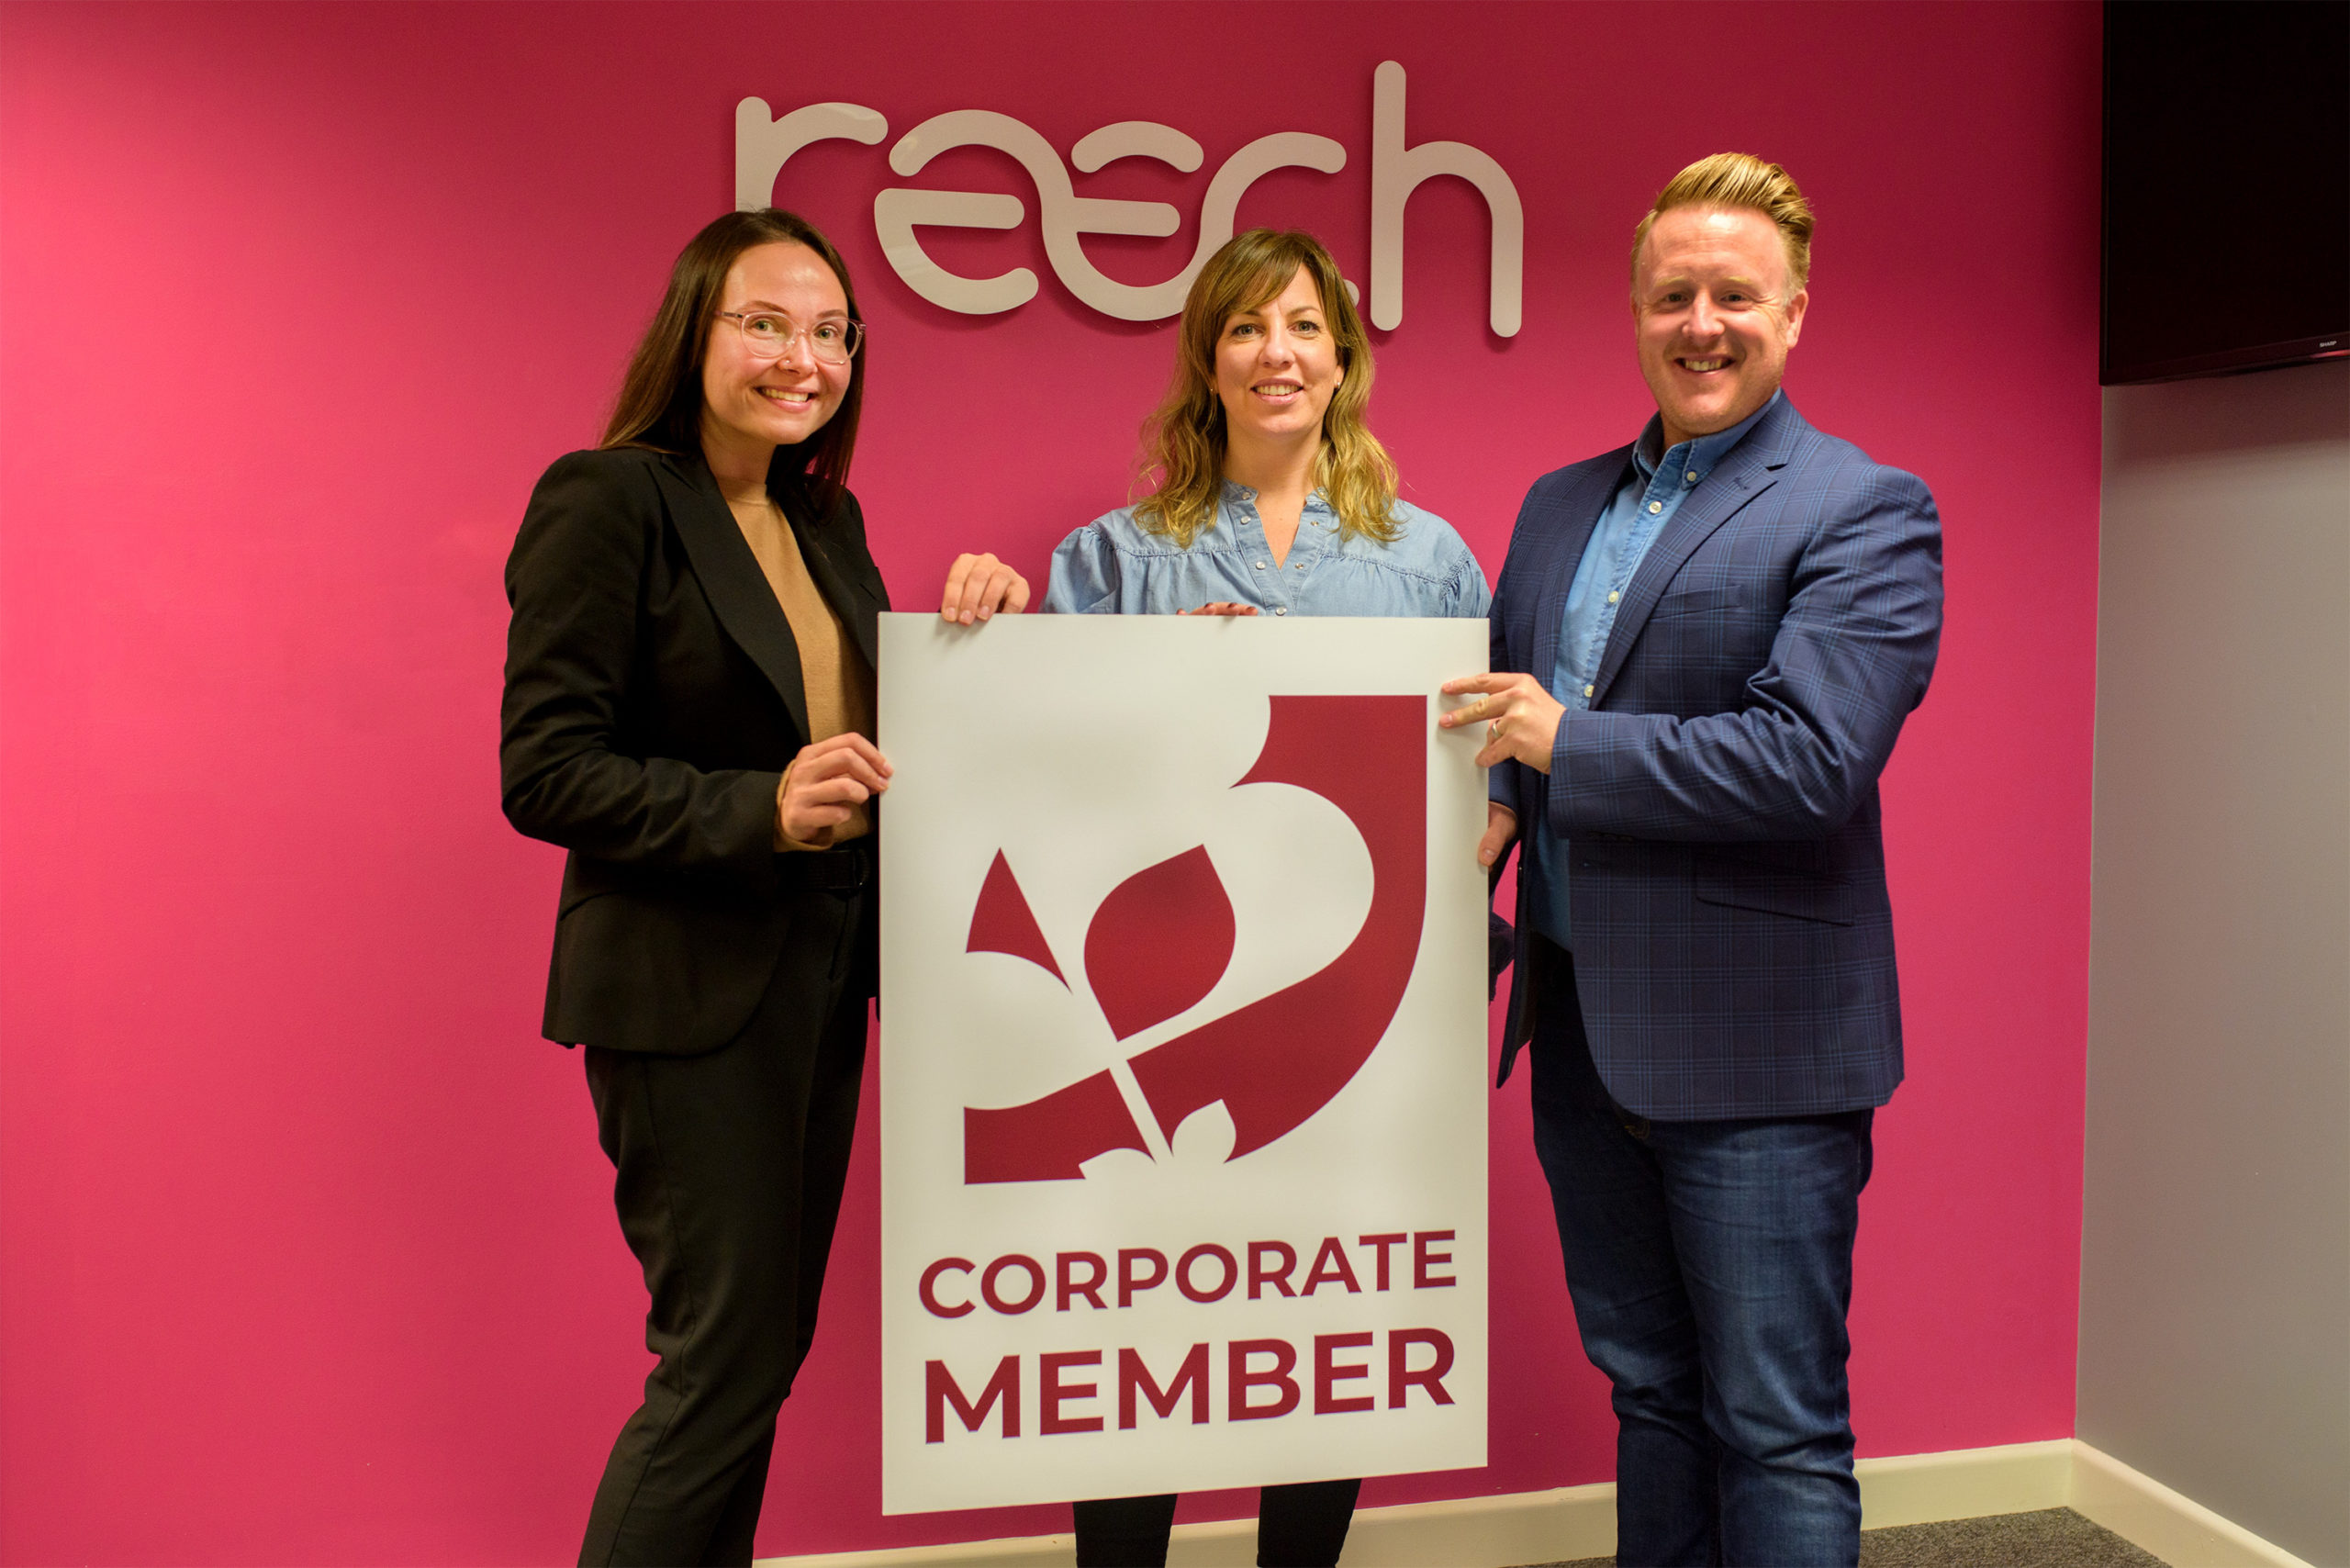 Corporate Members at Shropshire Chamber of Commerce | Reech